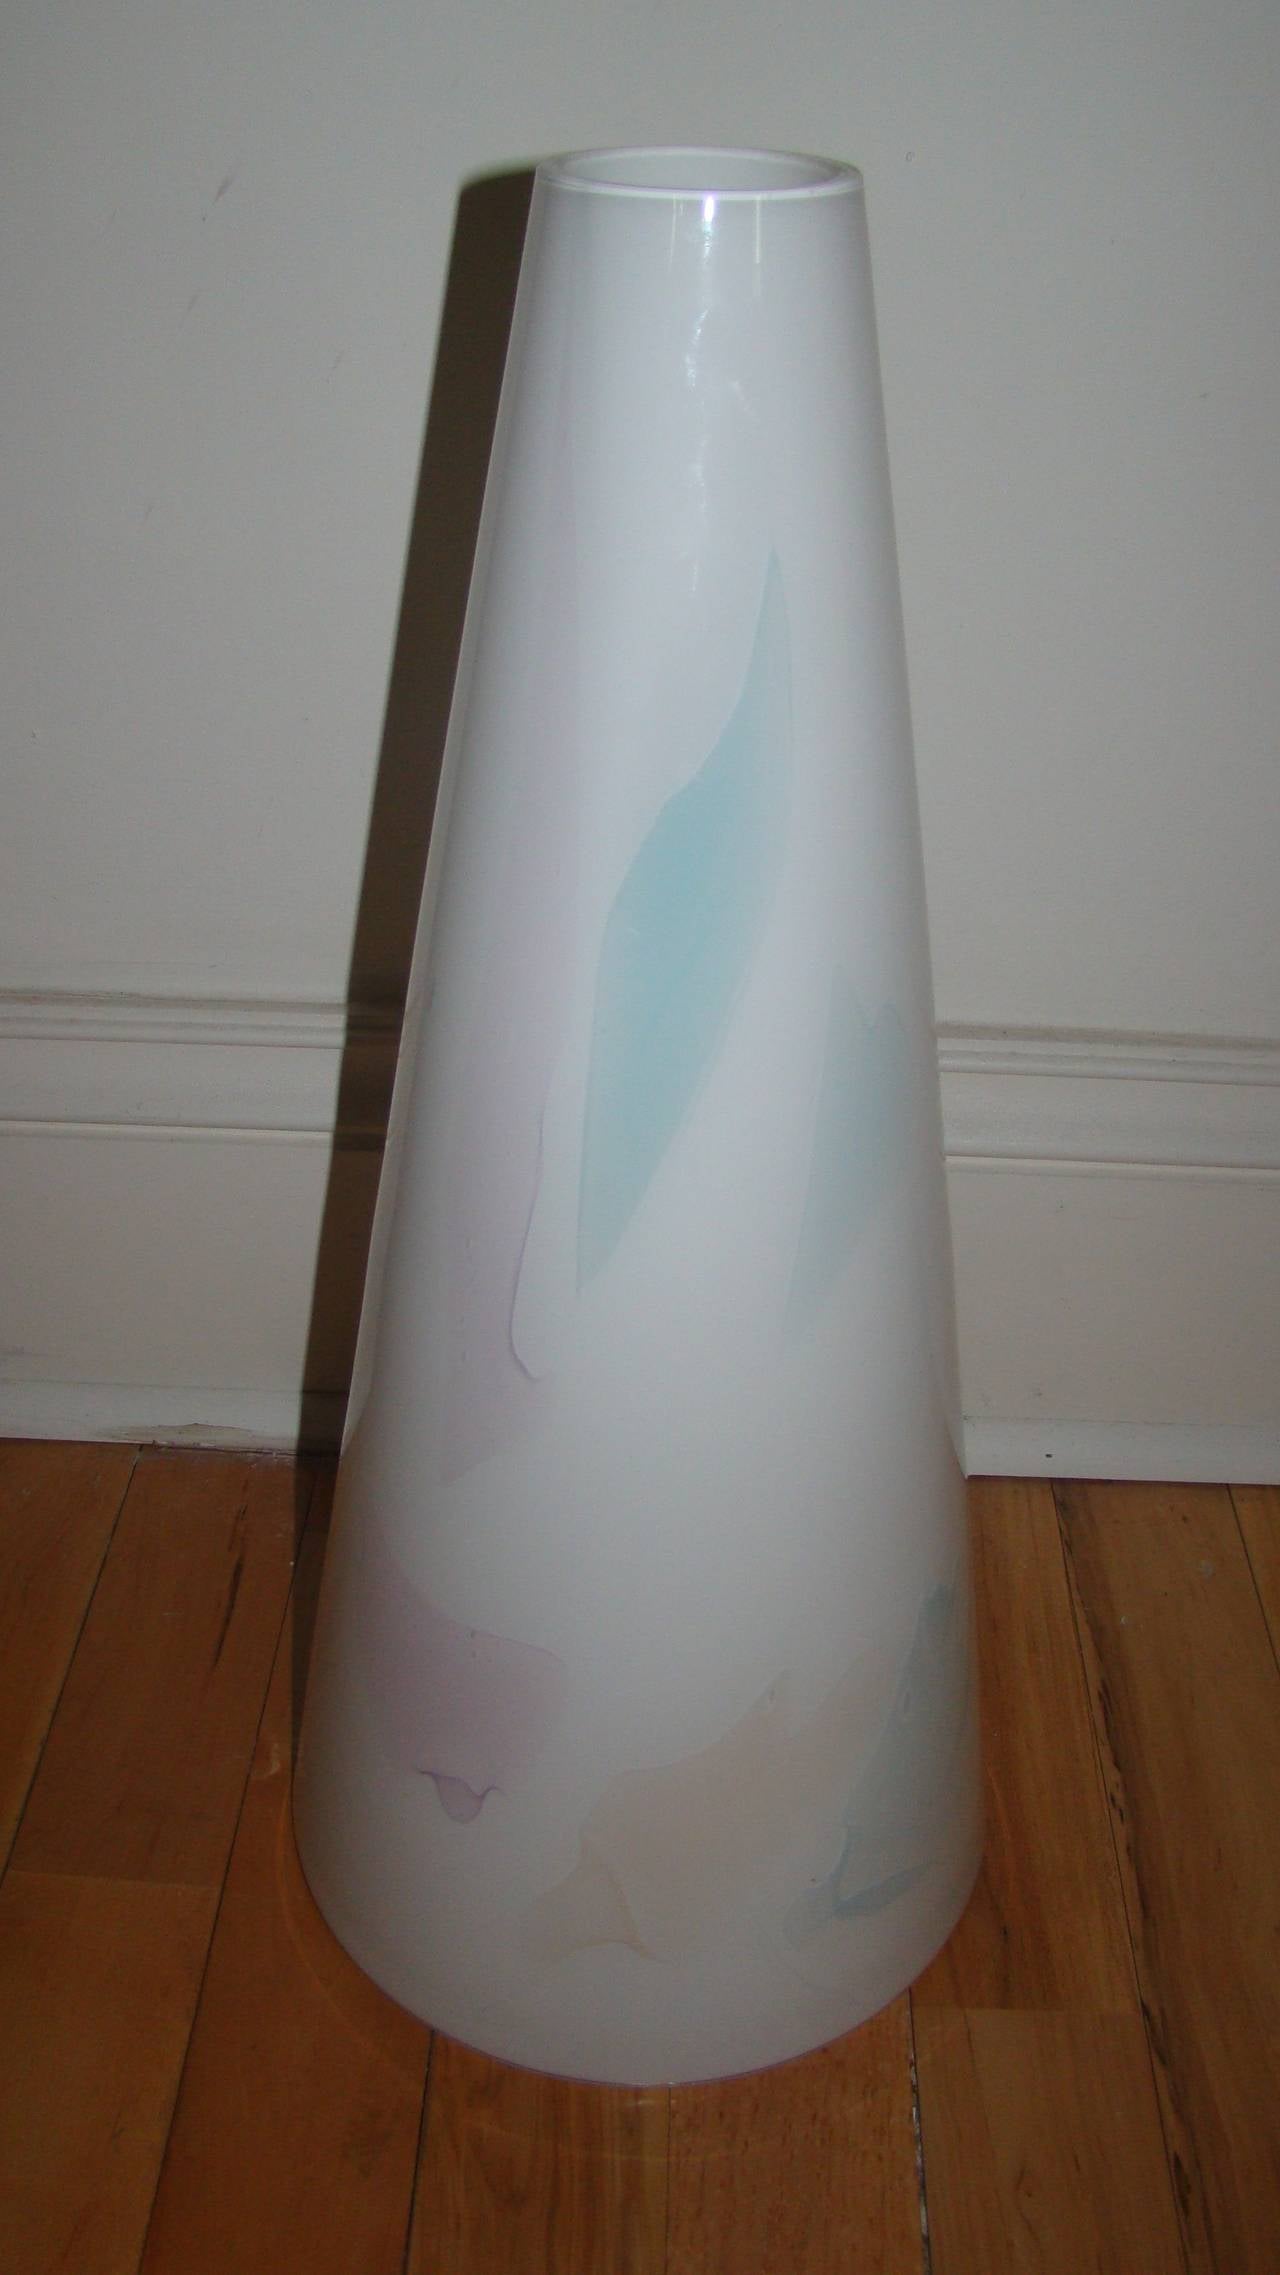 Terrific Mid-Century Murano glass vase. This beautiful piece is comprised of handblown white glass with light abstract colors of purple, blue, pink and peach throughout in an abstract conical form. It was likely retailed by Huff Furniture in the